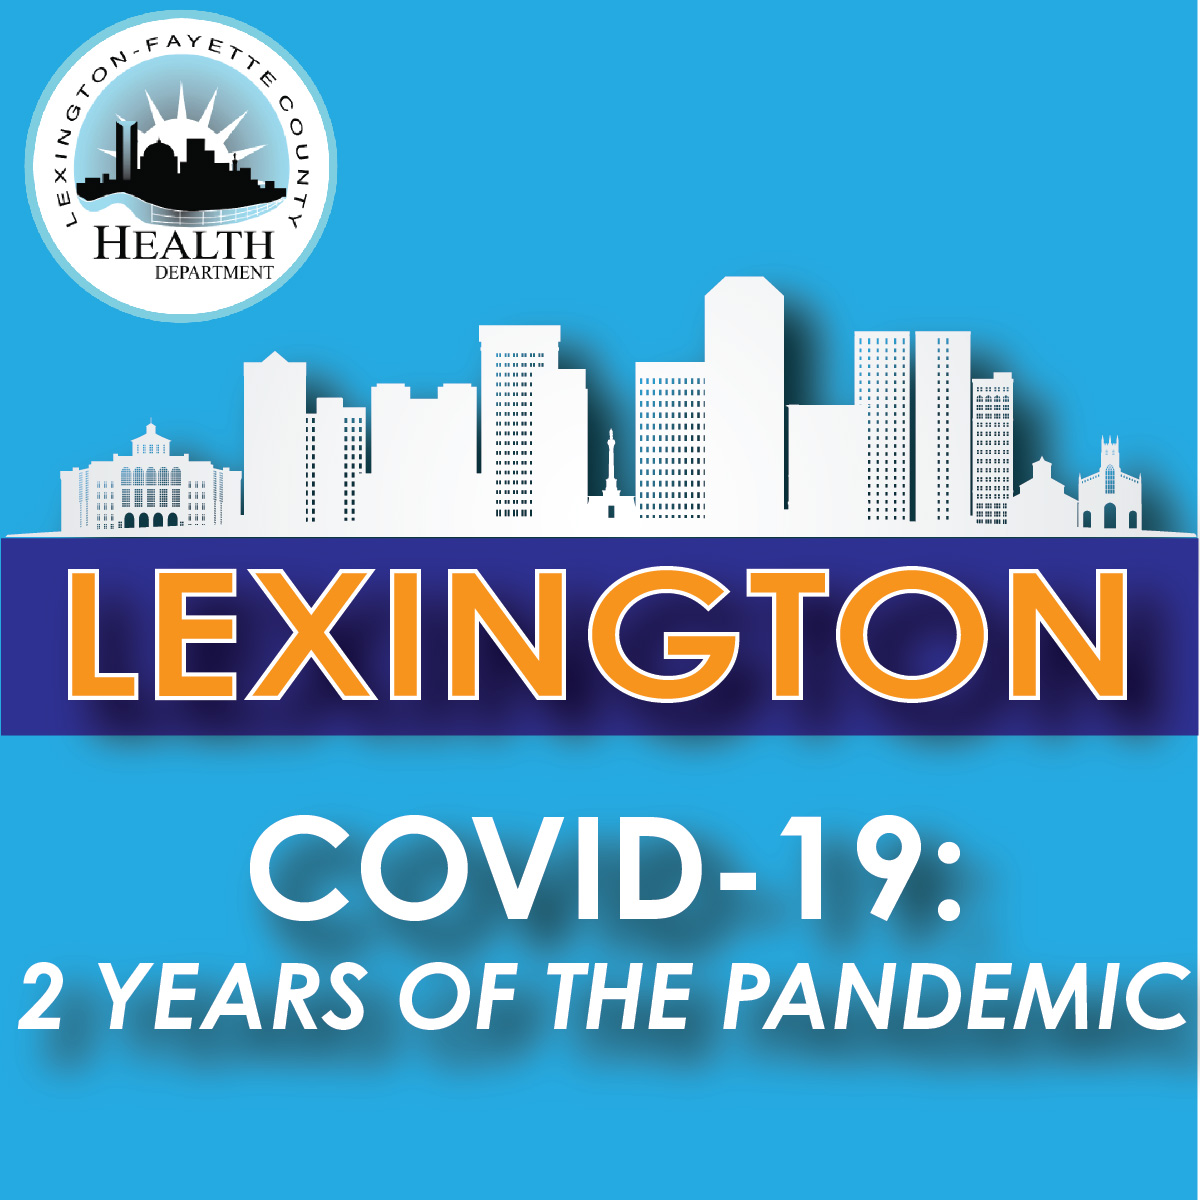 March 8, 2022: 2nd anniversary of city’s 1st COVID-19 case